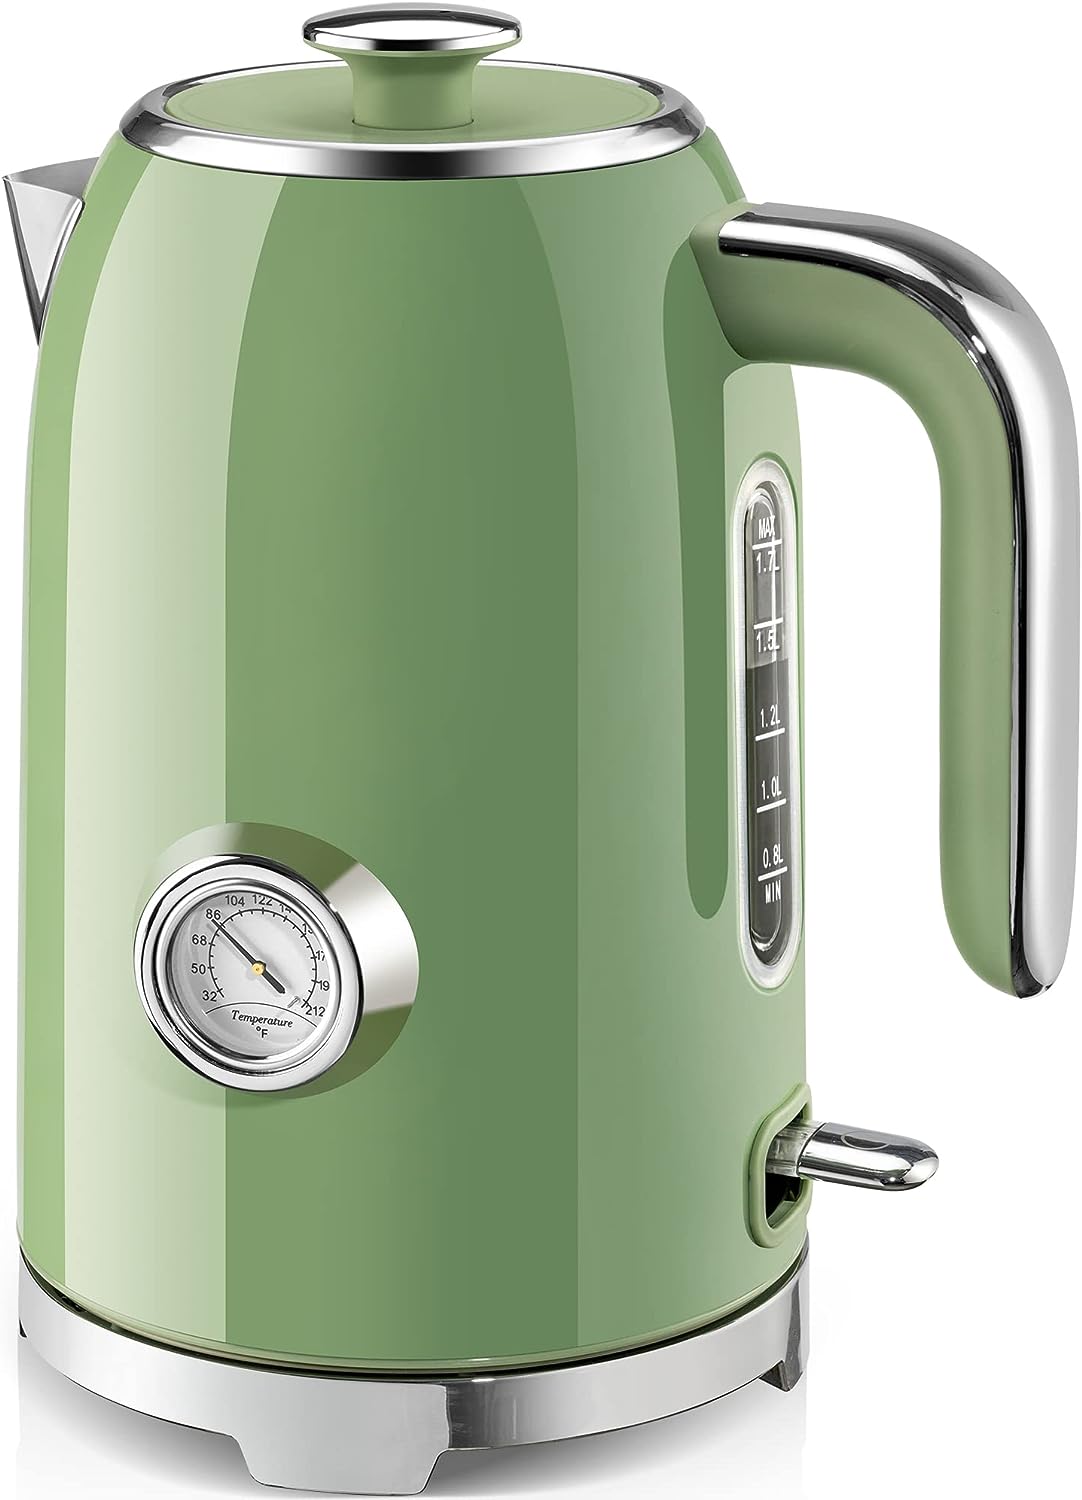 SUSTEAS Electric Kettle - 57oz Hot Tea Kettle Water Boiler with Thermometer, 1500W Fast Heating Stainless Steel Tea Pot, Cordless with LED Indicator, Auto Shut-Off  Boil Dry Protection, Retro Green